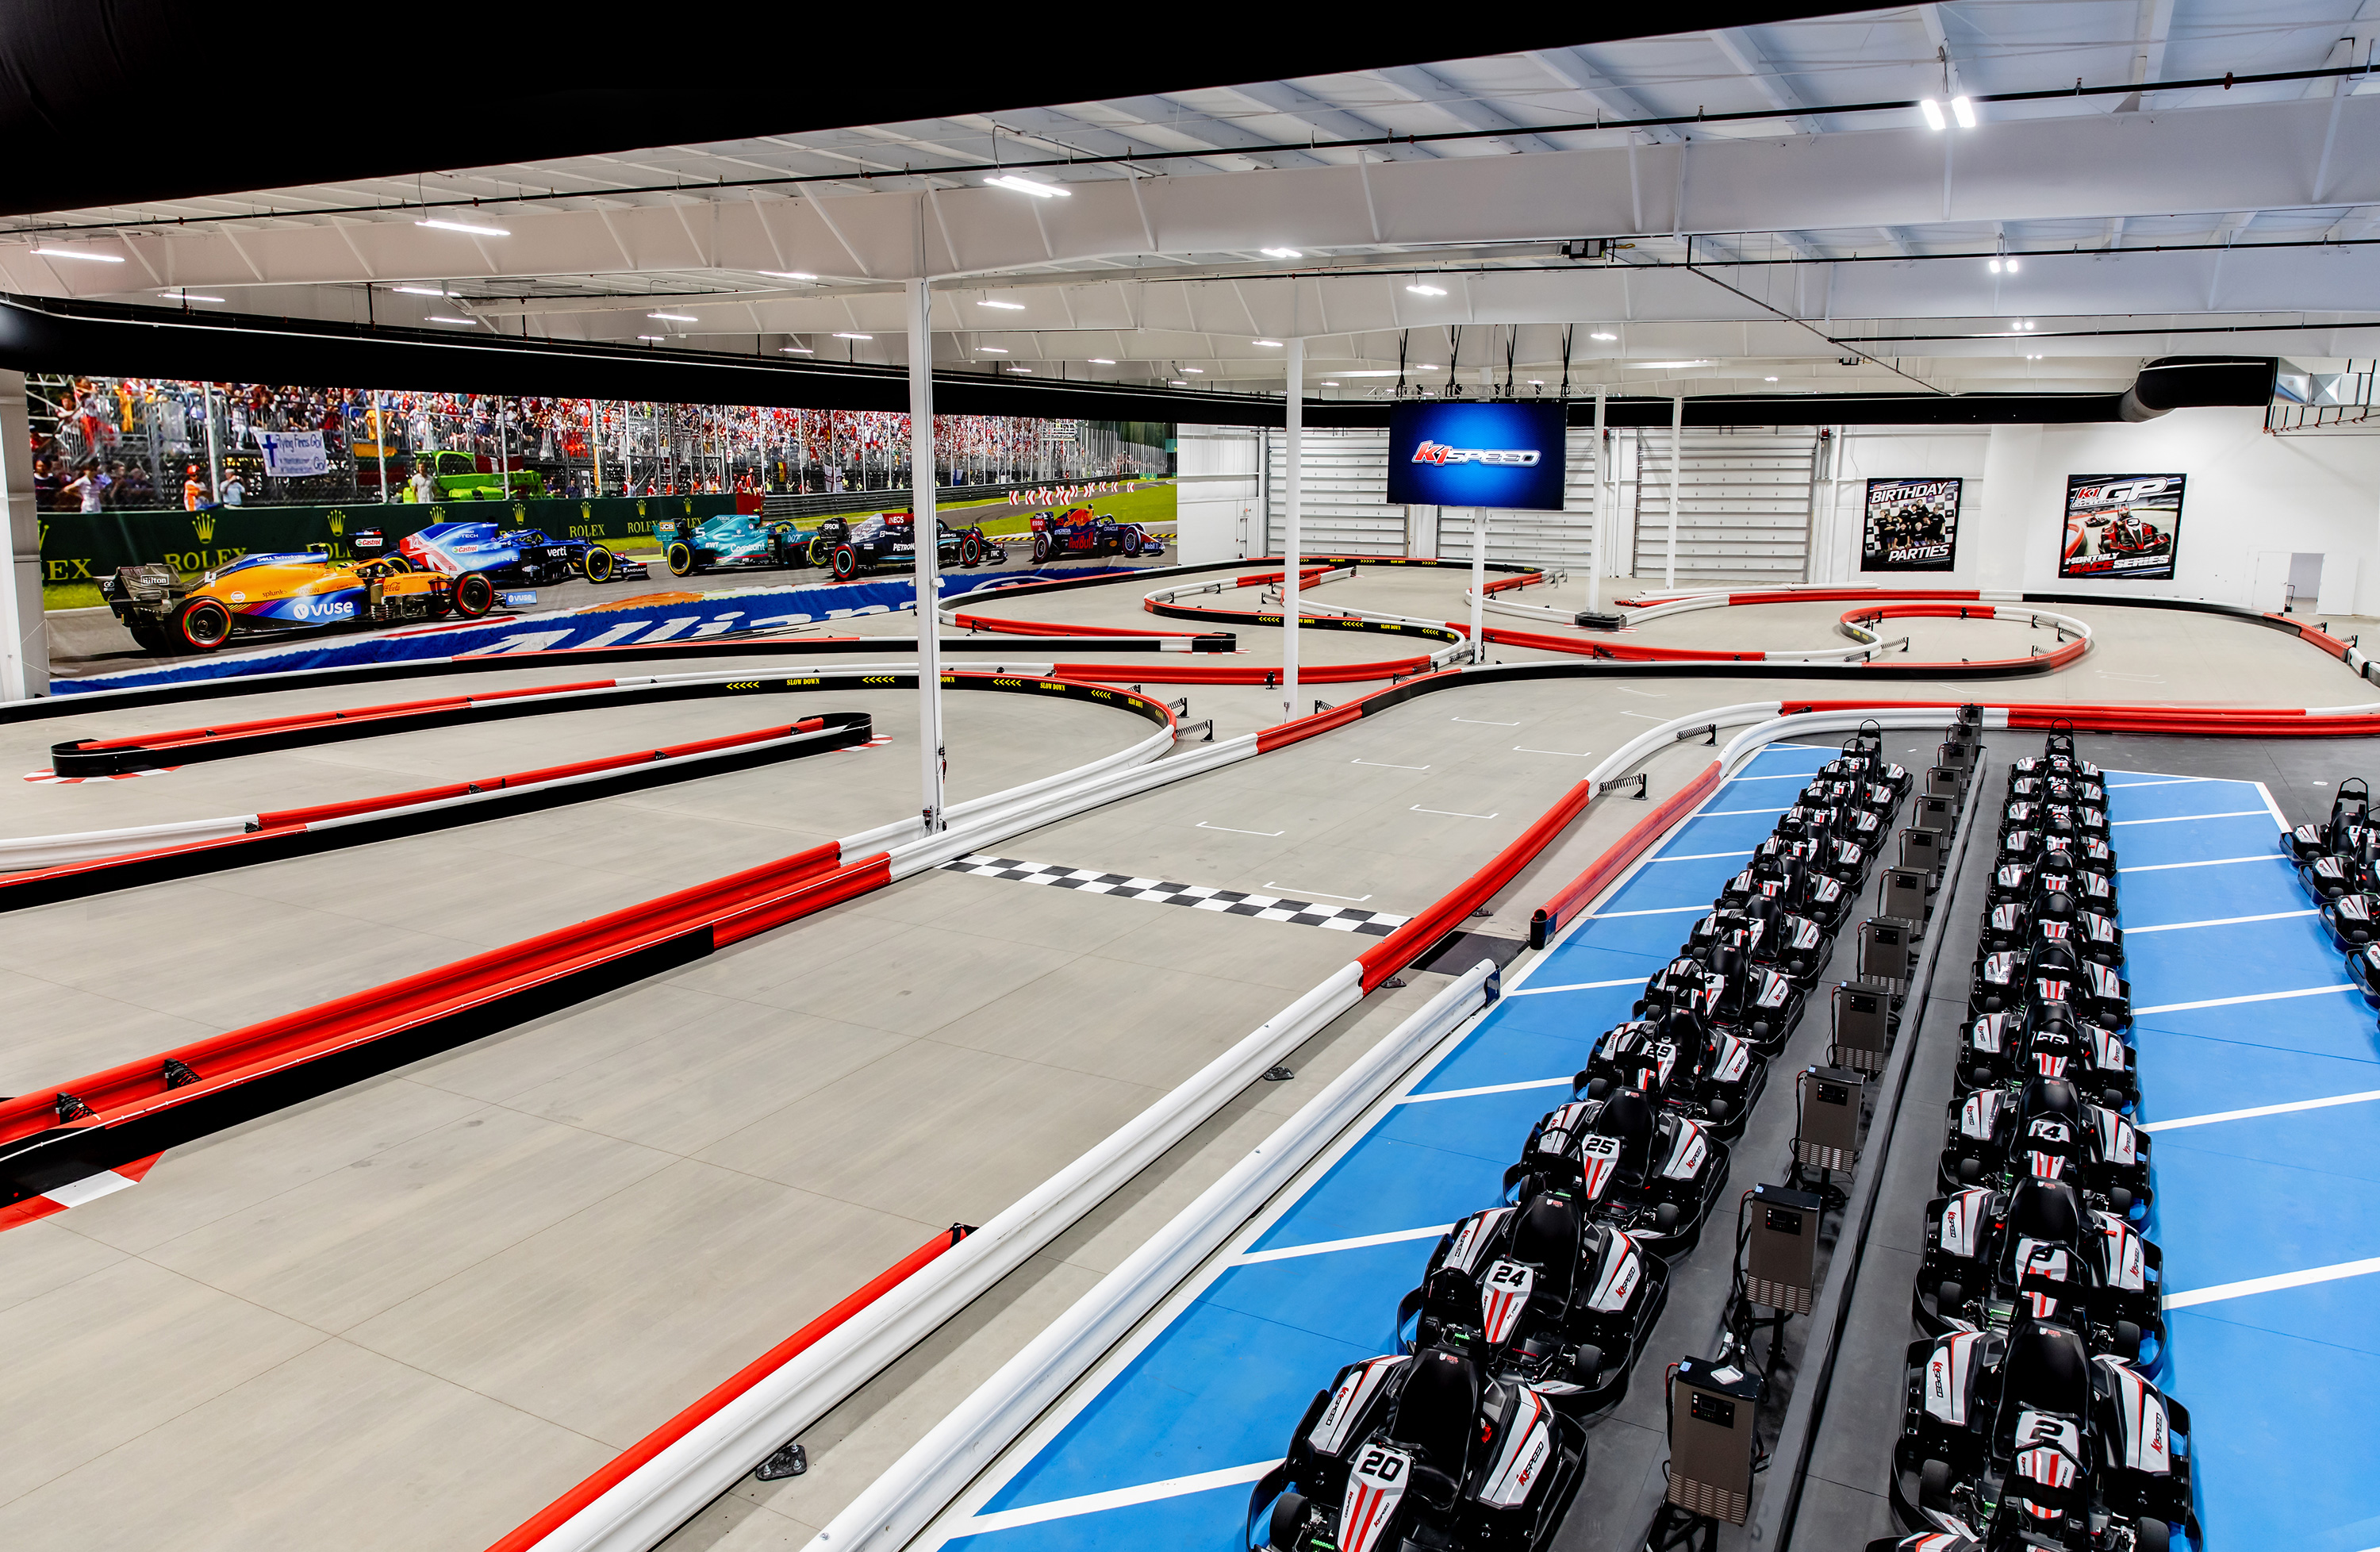 The indoor go kart track inside K1 Speed Canton in North Canton